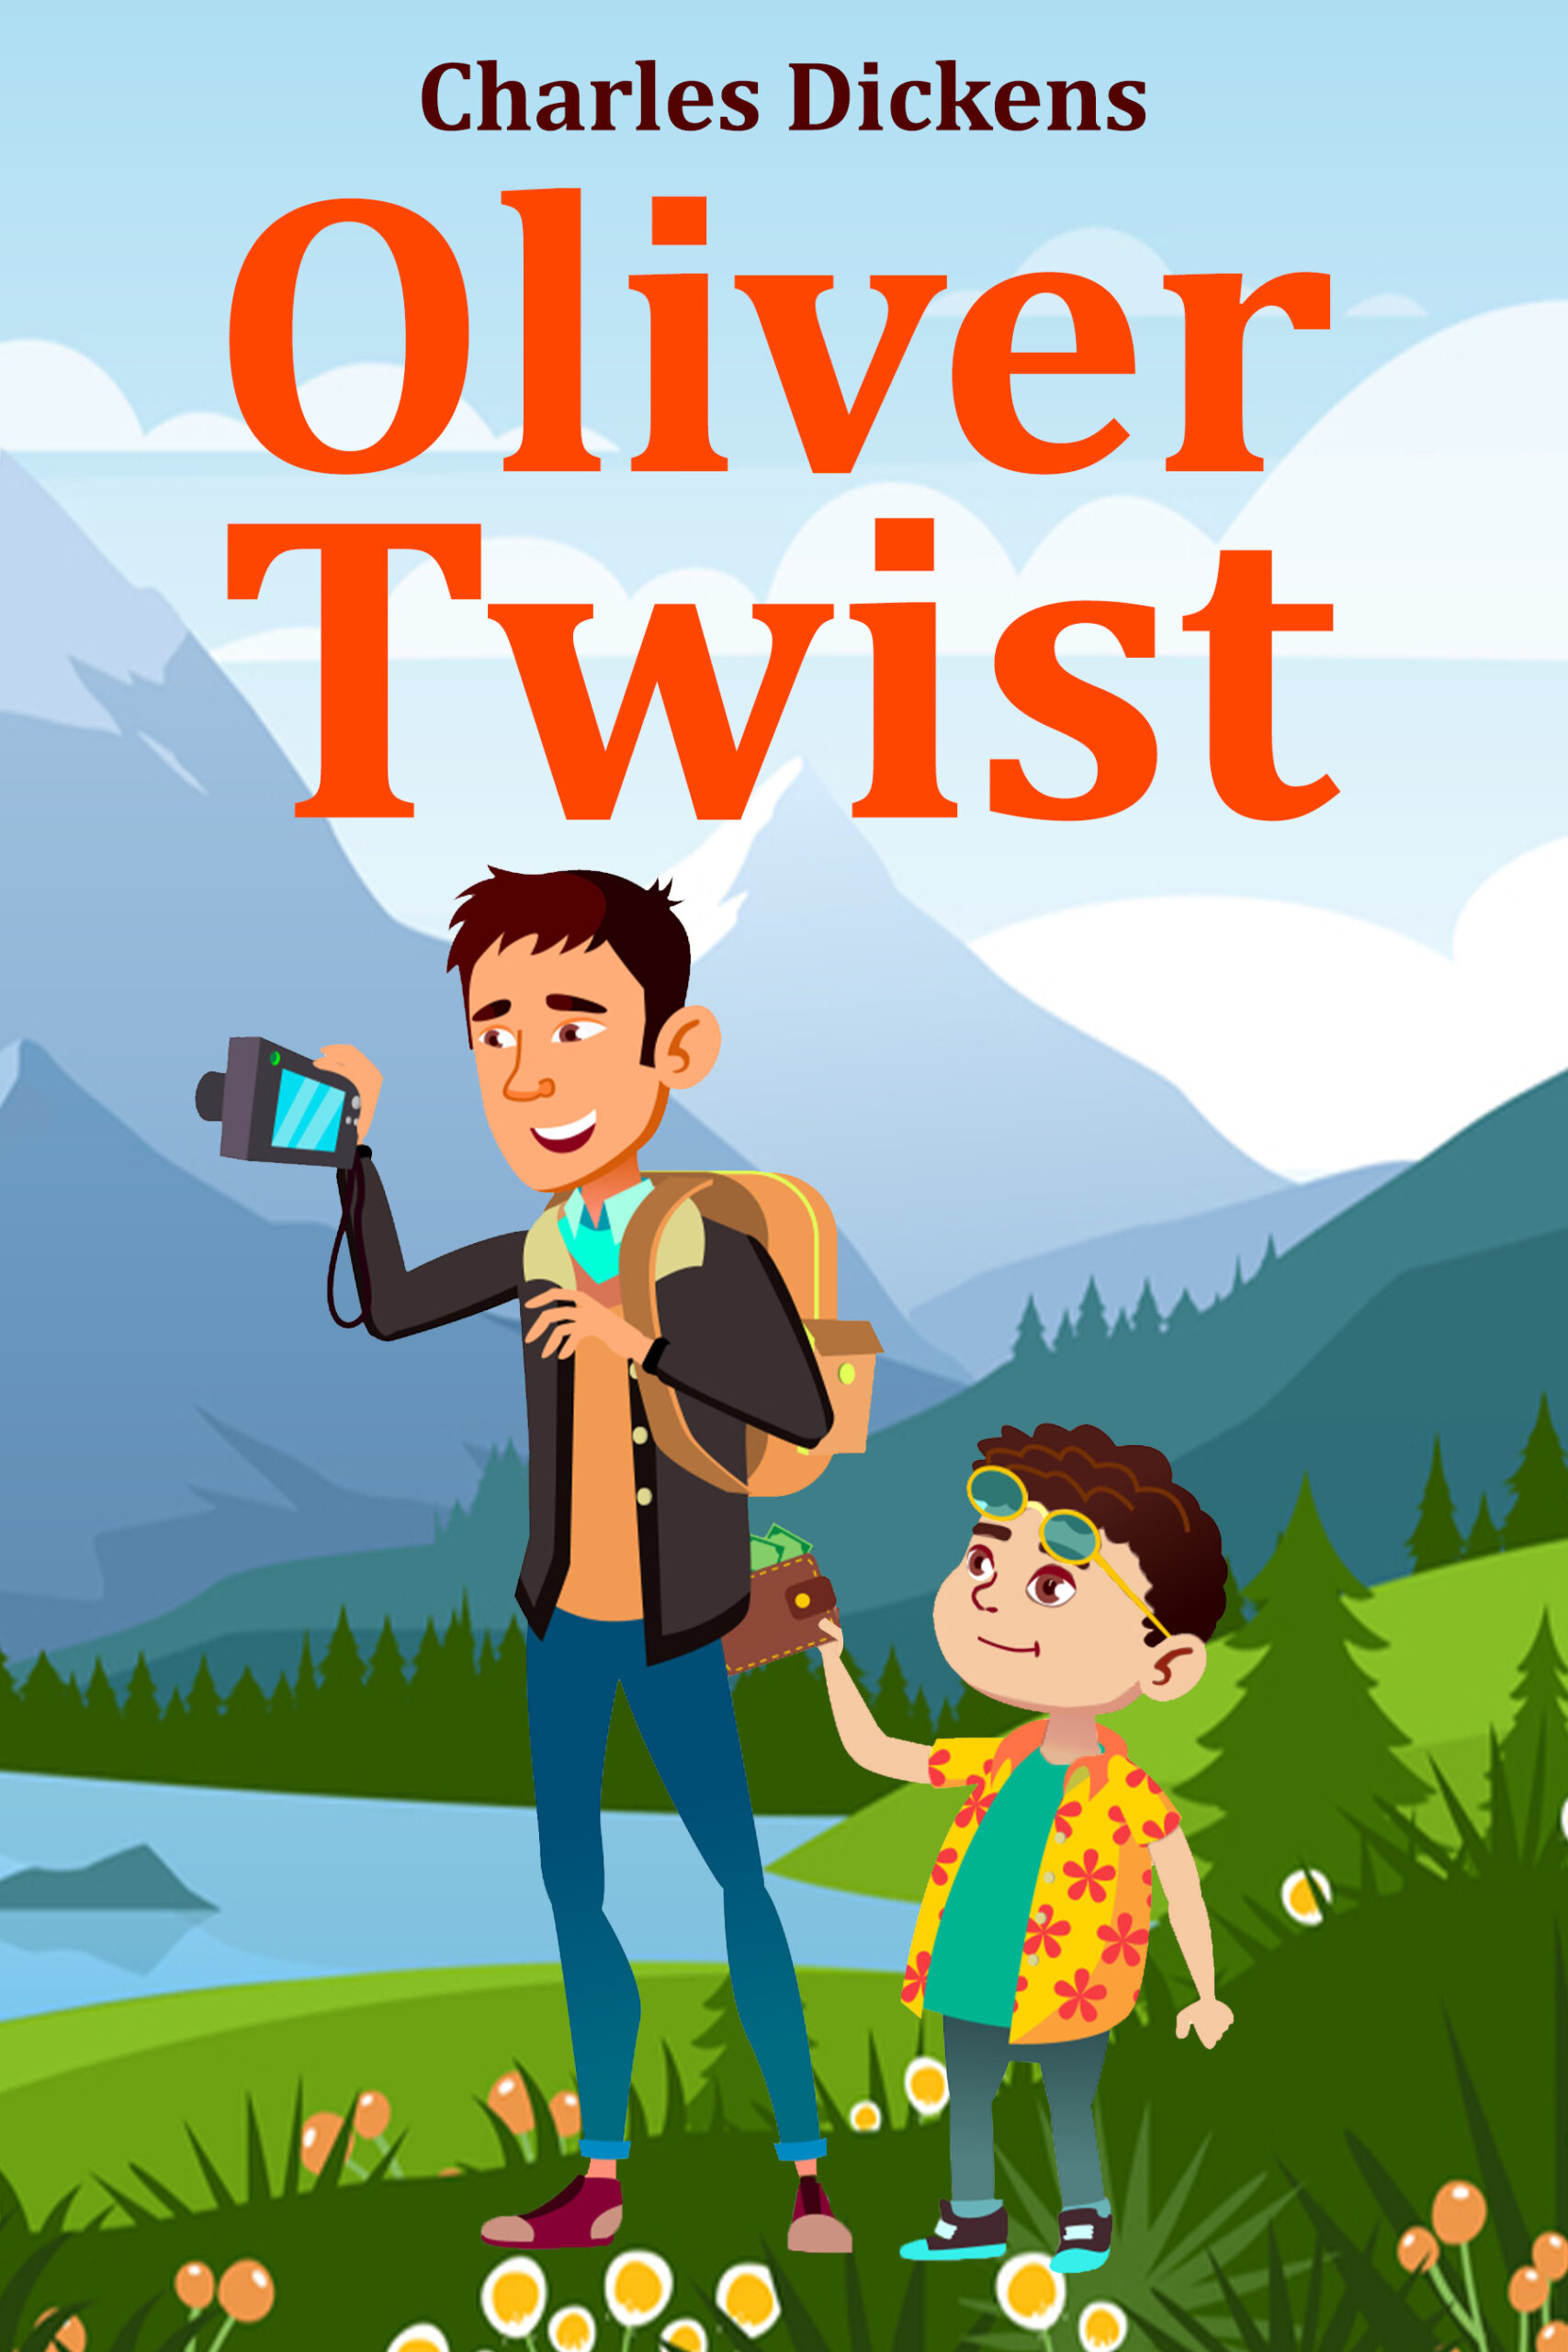 FREE: Oliver Twist by Charles Dickens